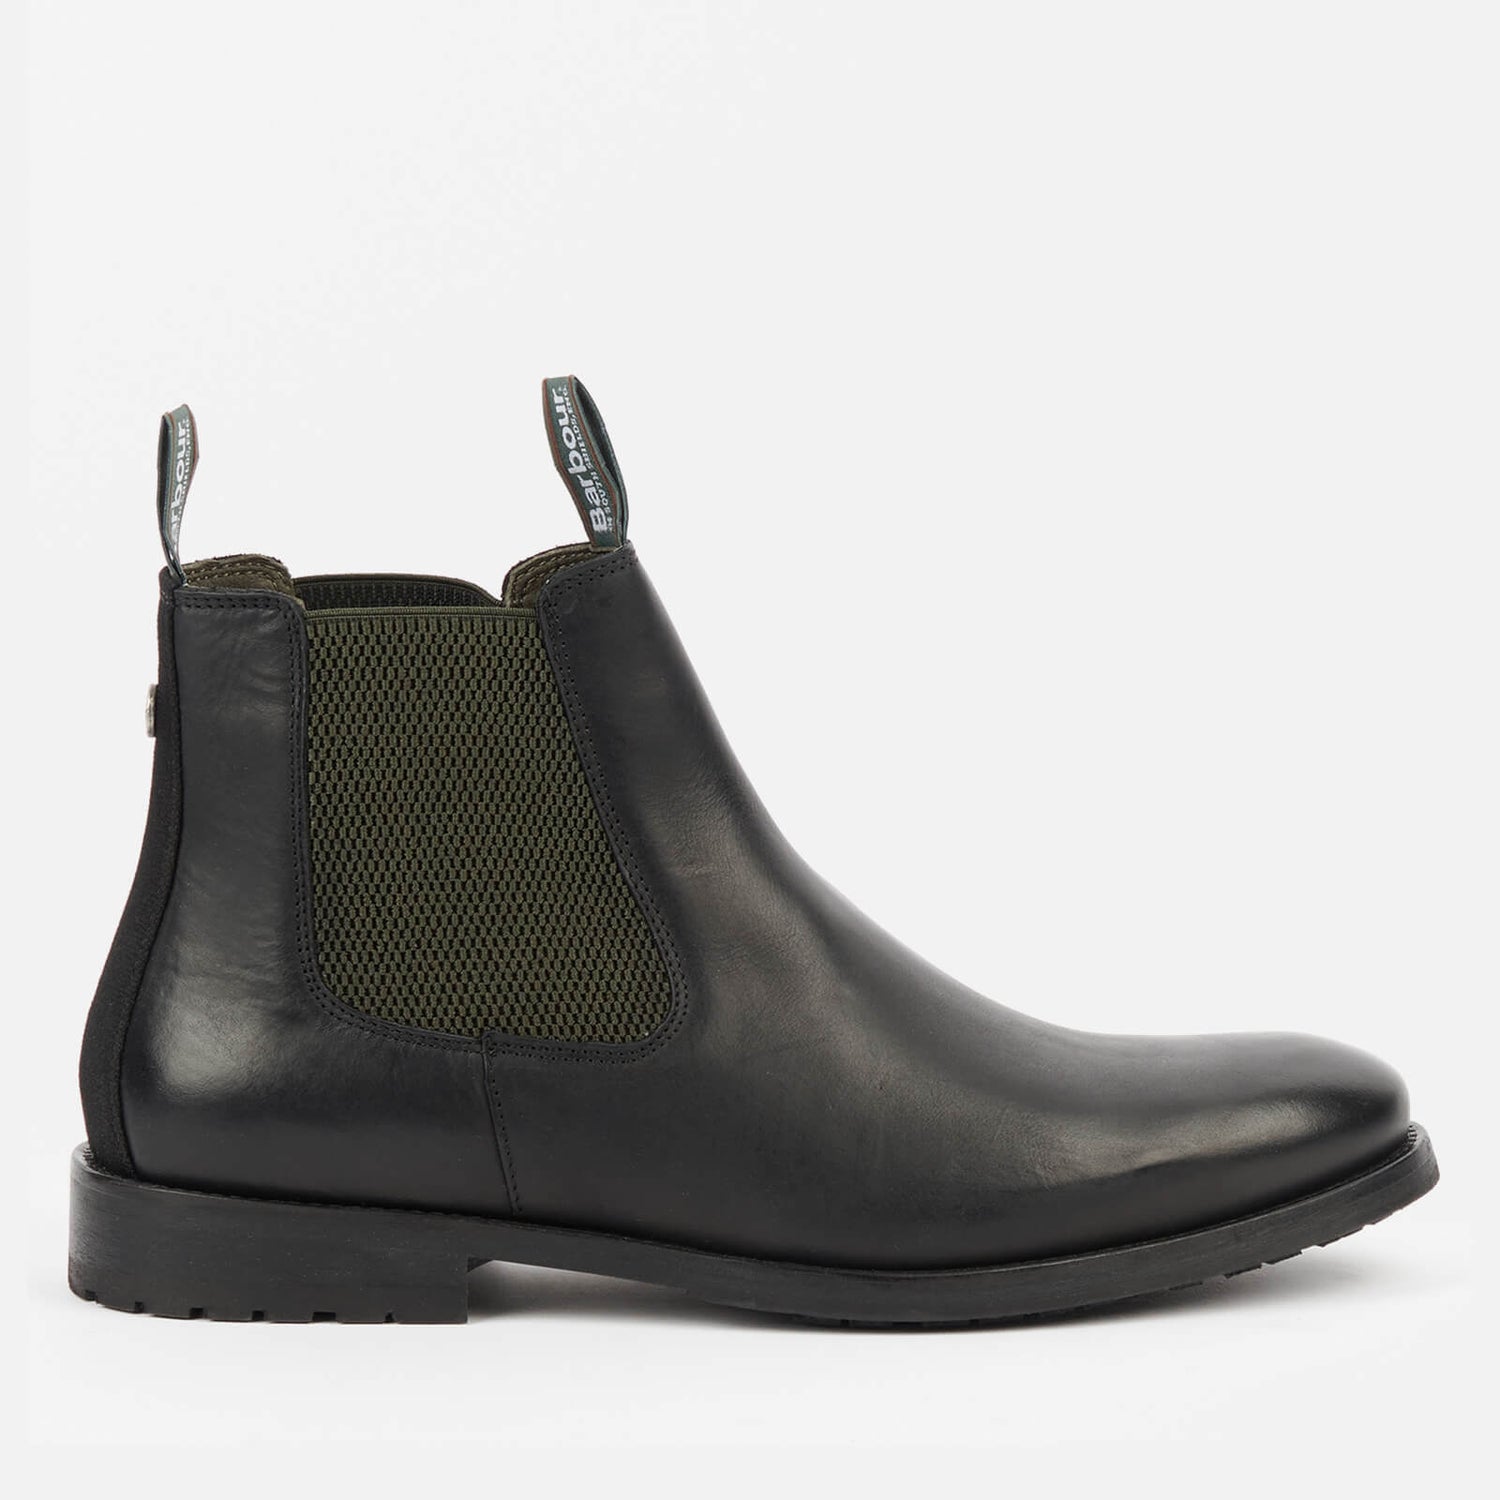 Barbour Farndish Leather Chelsea Boots - UK 7